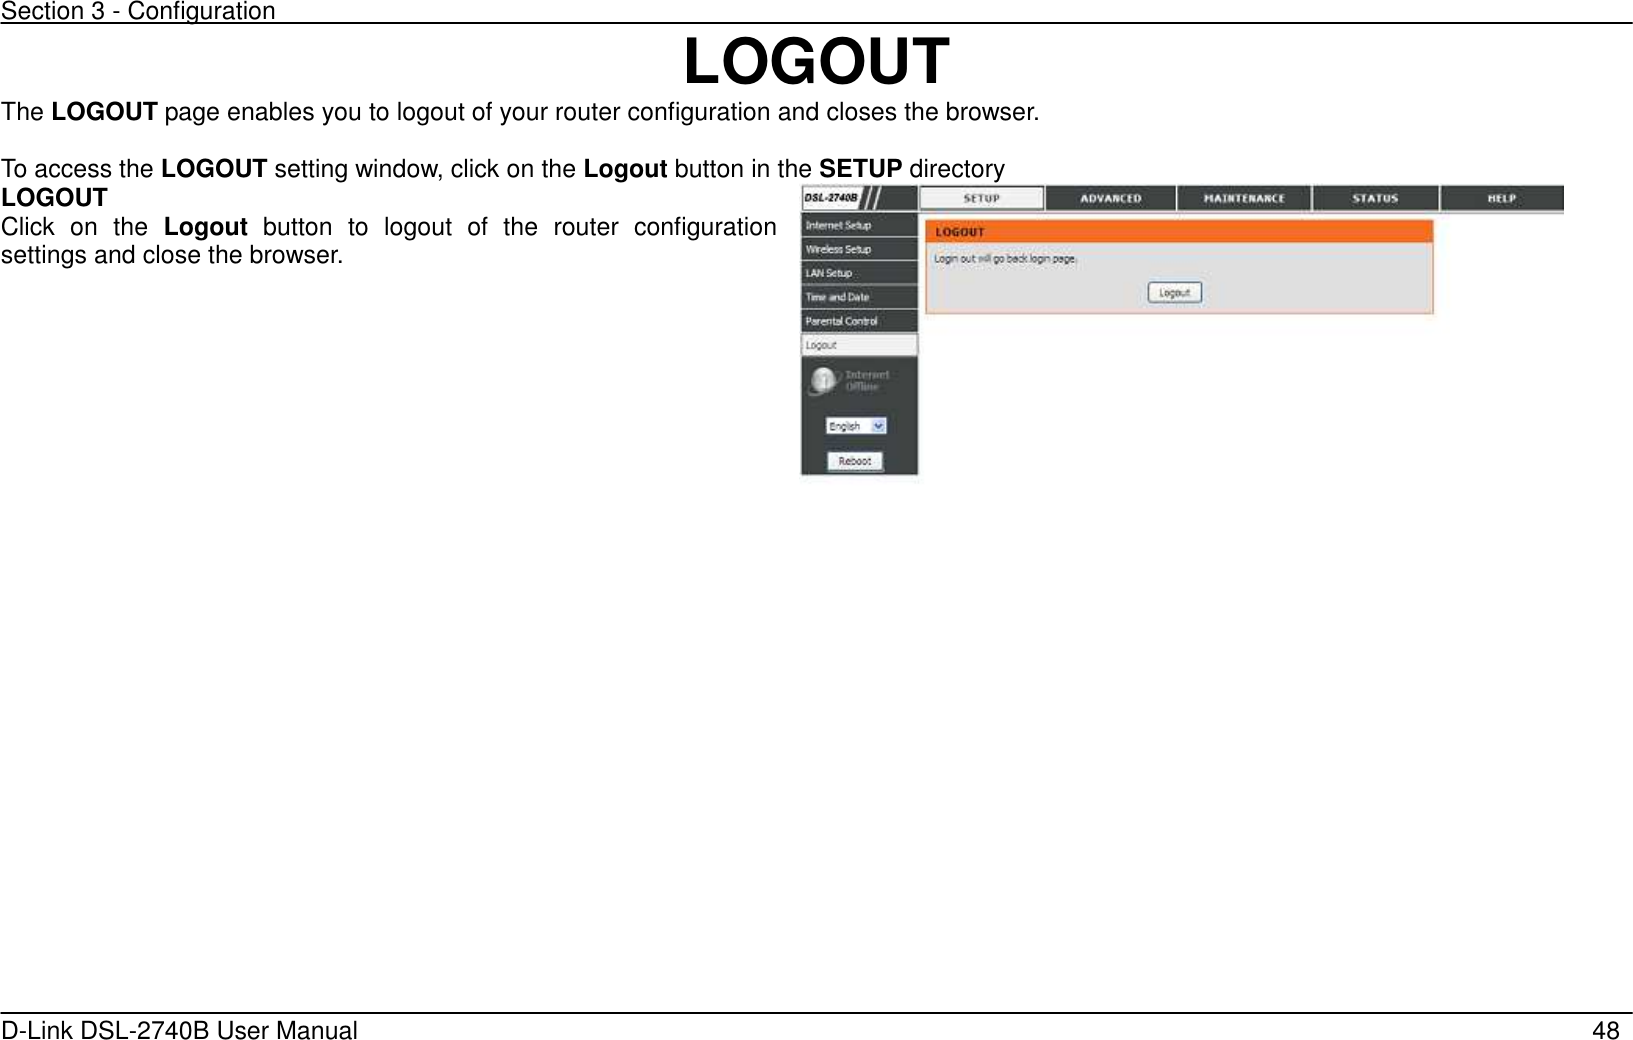 Section 3 - Configuration   D-Link DSL-2740B User Manual                                                  48  LOGOUT The LOGOUT page enables you to logout of your router configuration and closes the browser.  To access the LOGOUT setting window, click on the Logout button in the SETUP directory LOGOUT Click  on  the  Logout  button  to  logout  of  the  router  configuration settings and close the browser.   